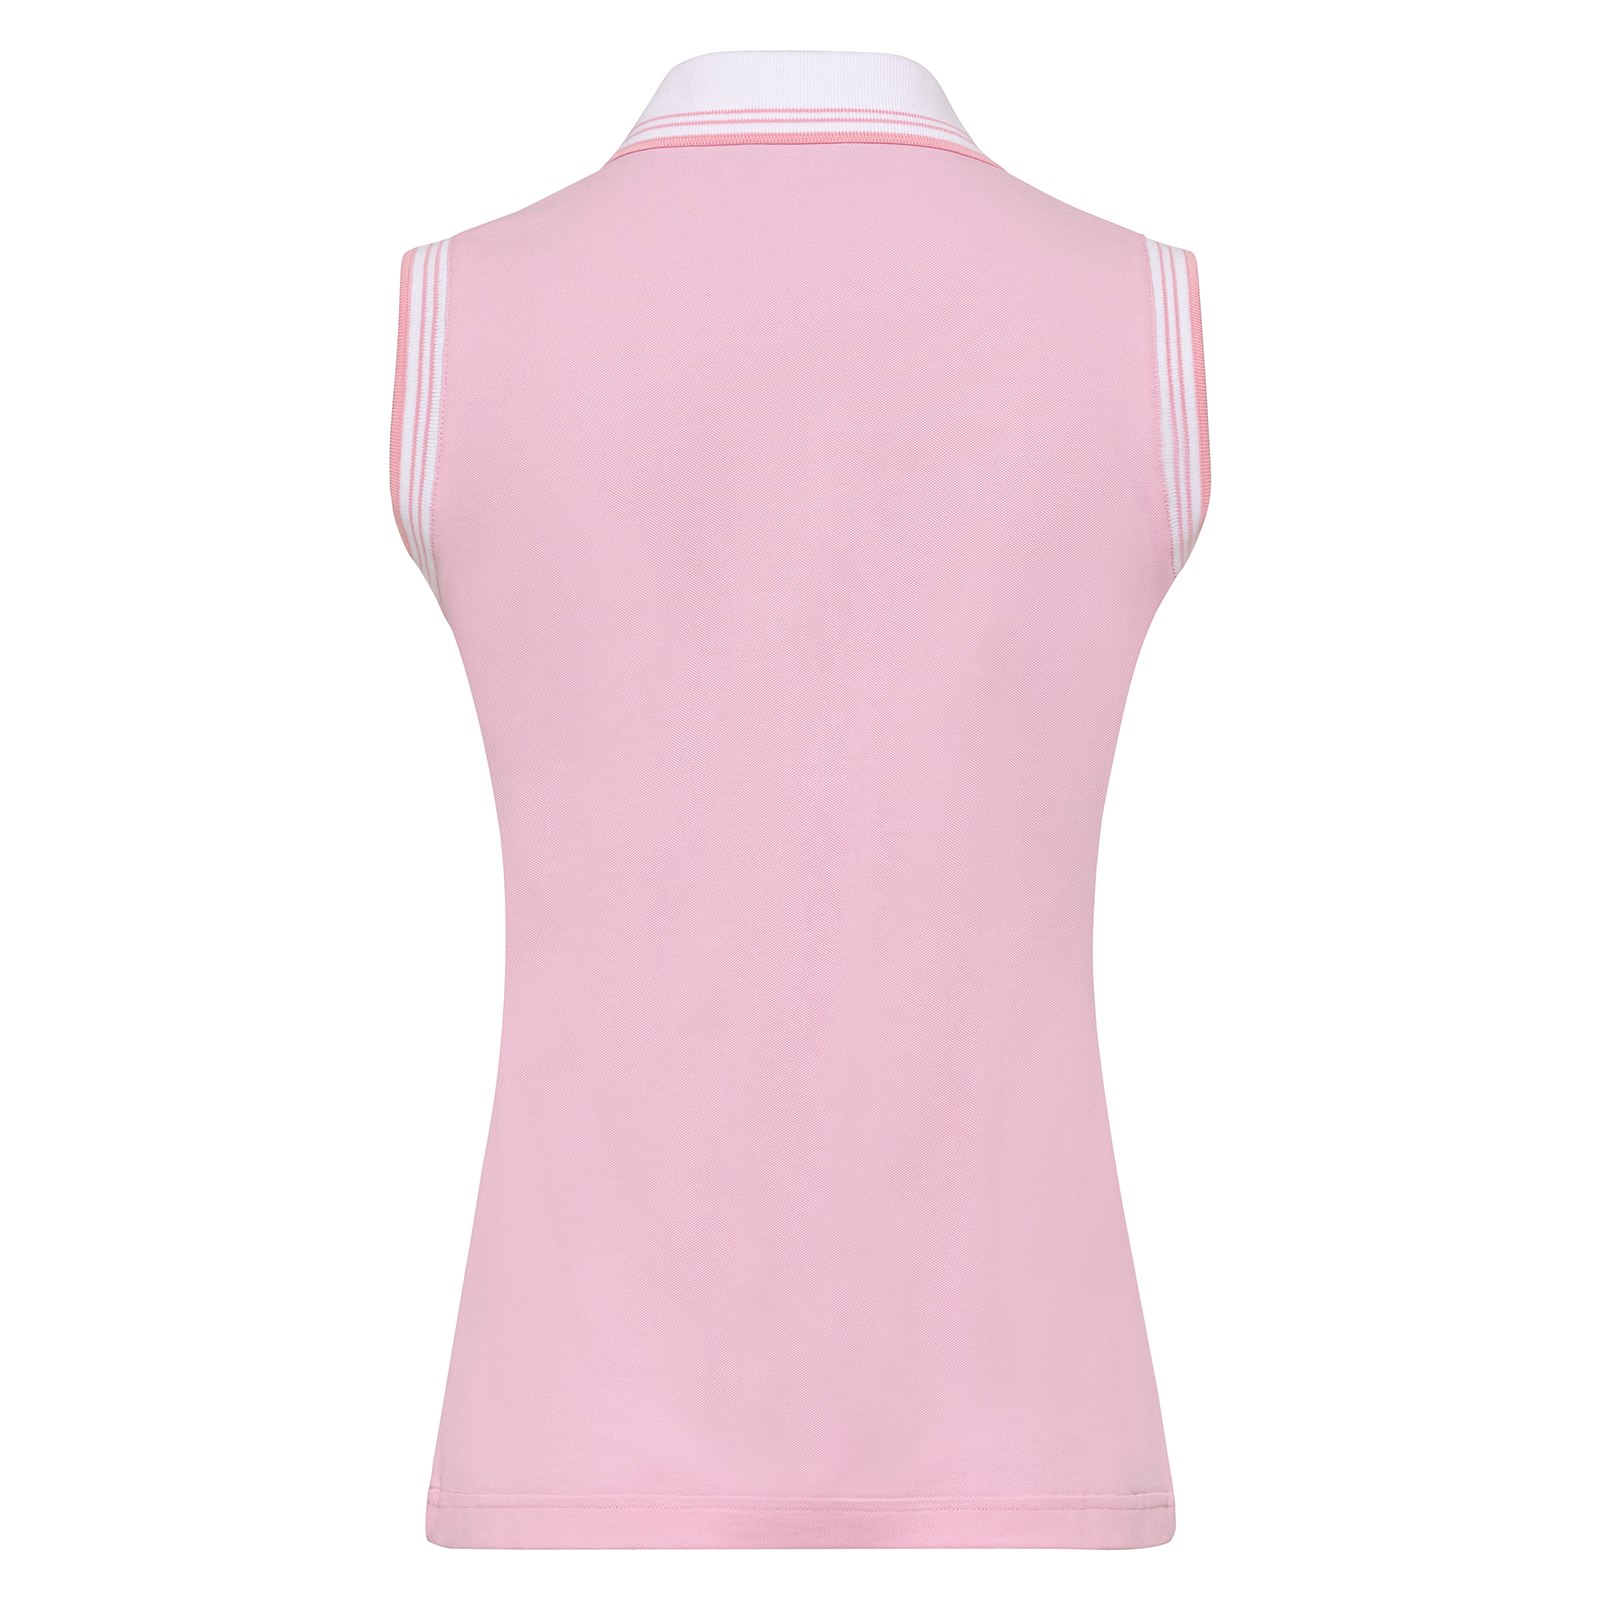 Airy ladies' polo shirt with ultraviolet protection